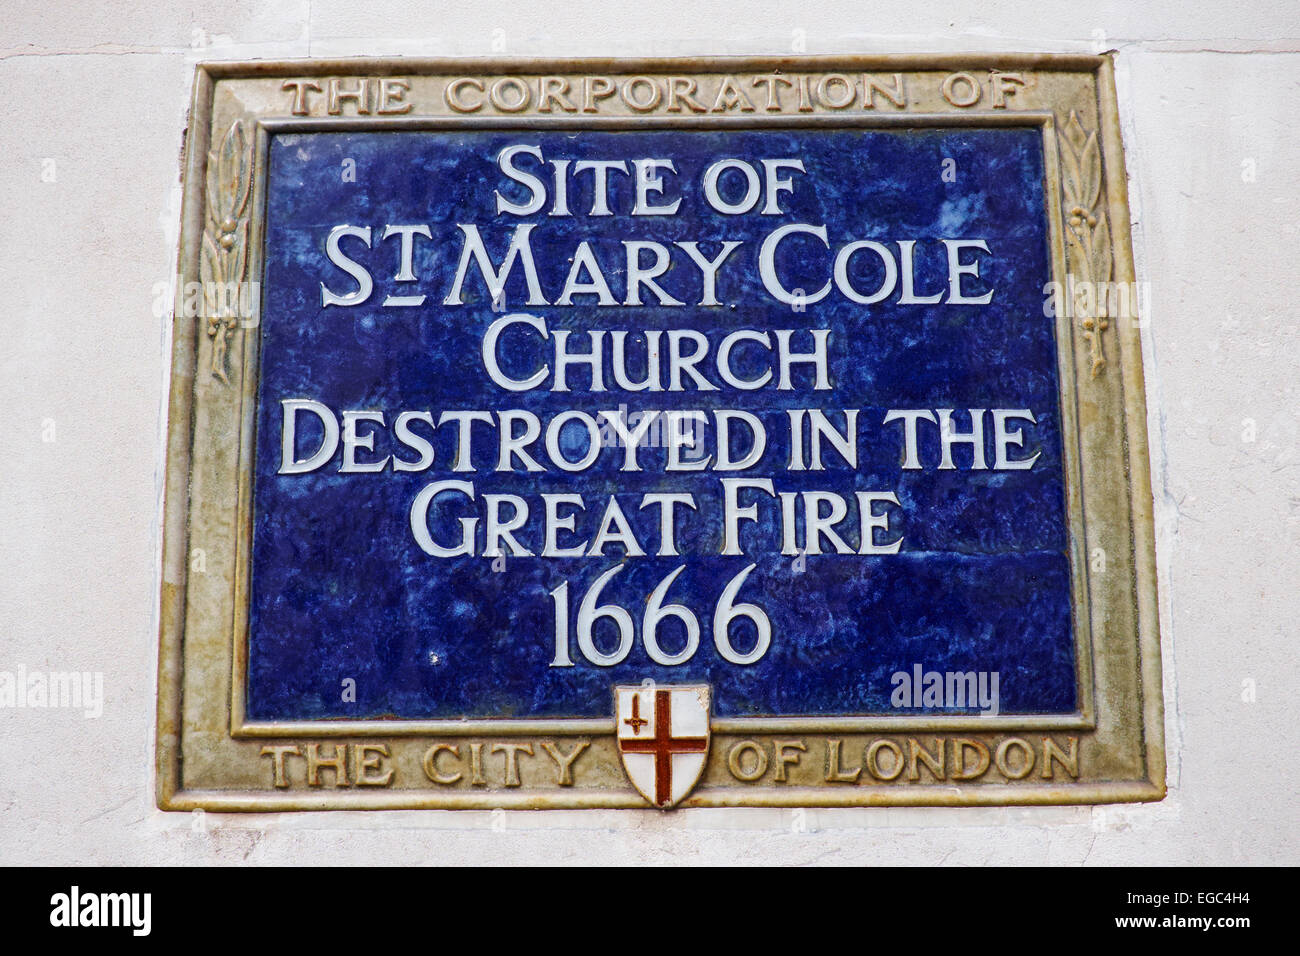 Blue Plaque Marking The Site Of St Mary Cole Church Destroyed In The Great Fire 1666 Old Jewry City Of London UK Stock Photo